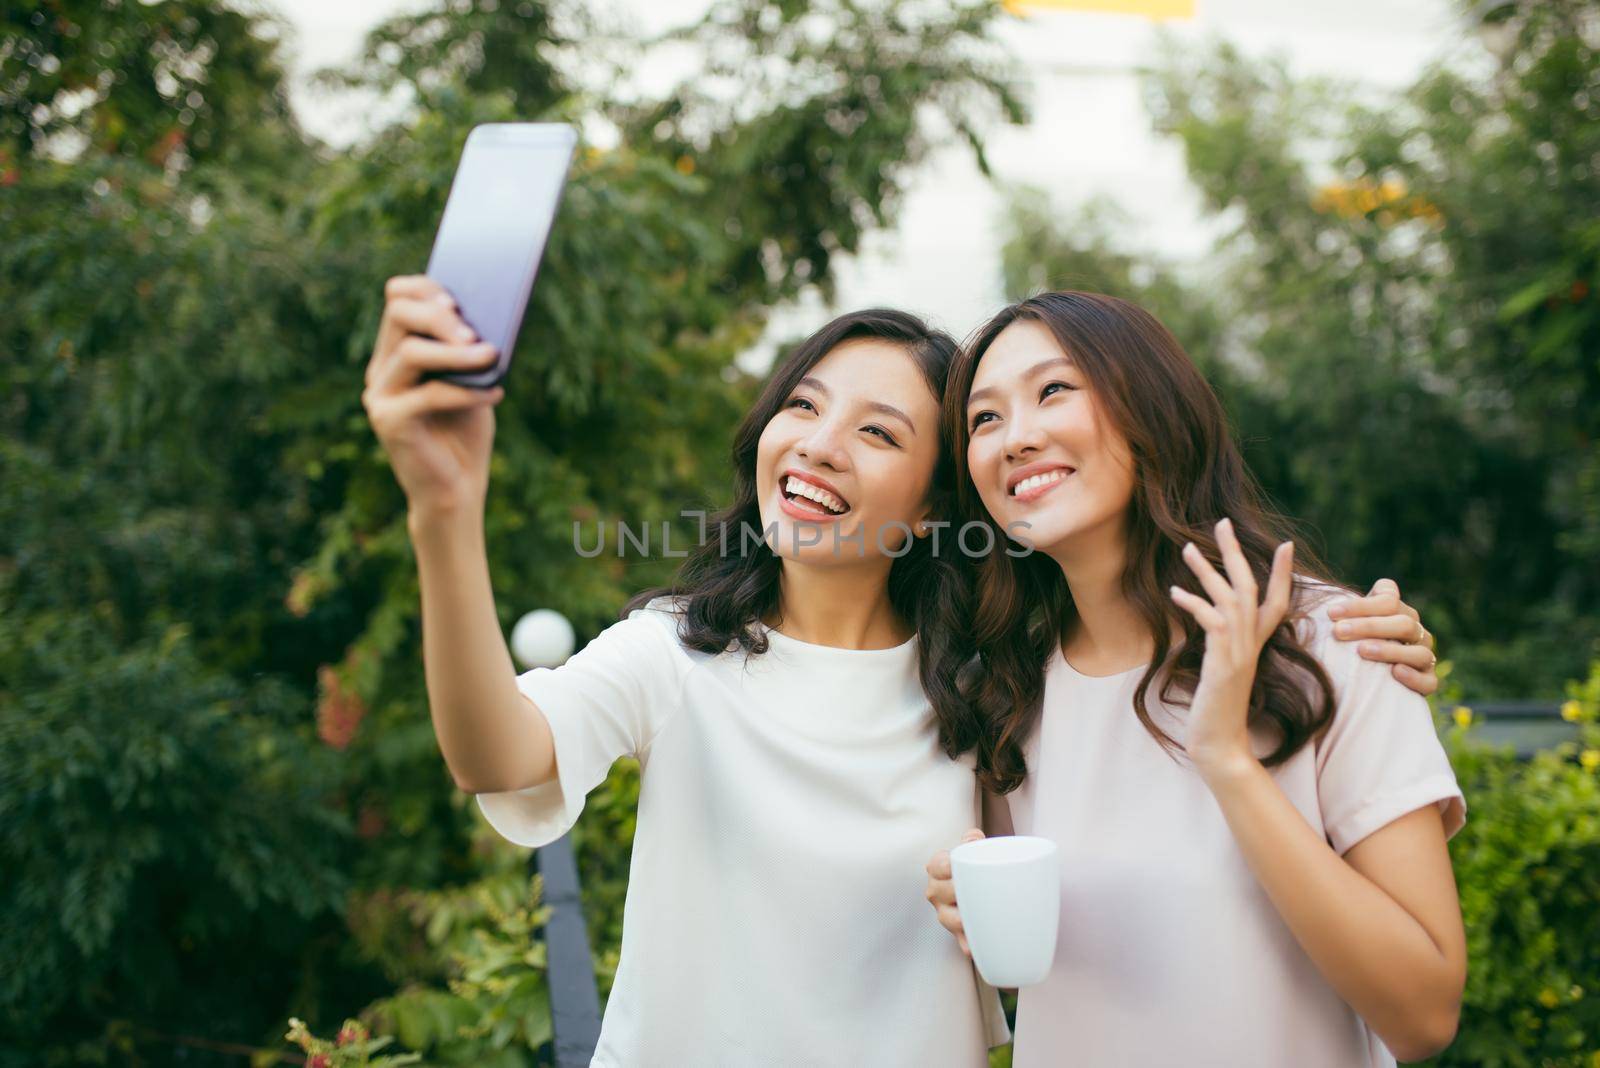 Lifestyle of Two beautiful Happiness Long Hair Women are  Using Mobile Phone for Selfie in Garden. Asian Female Models Portrait Concept.